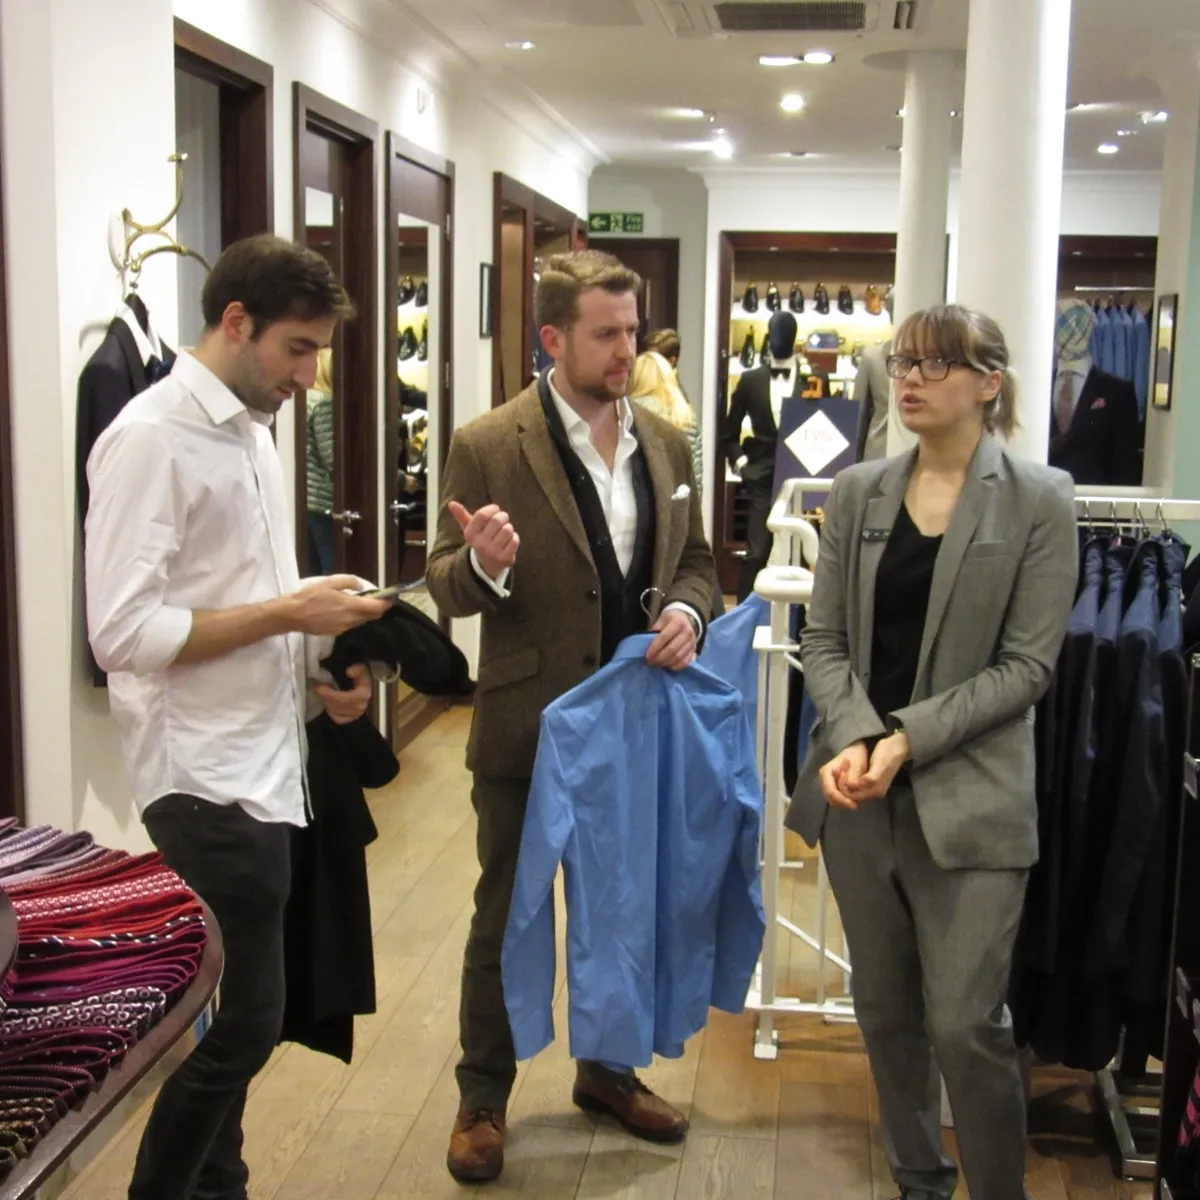 Rupert selecting clothing for his male client